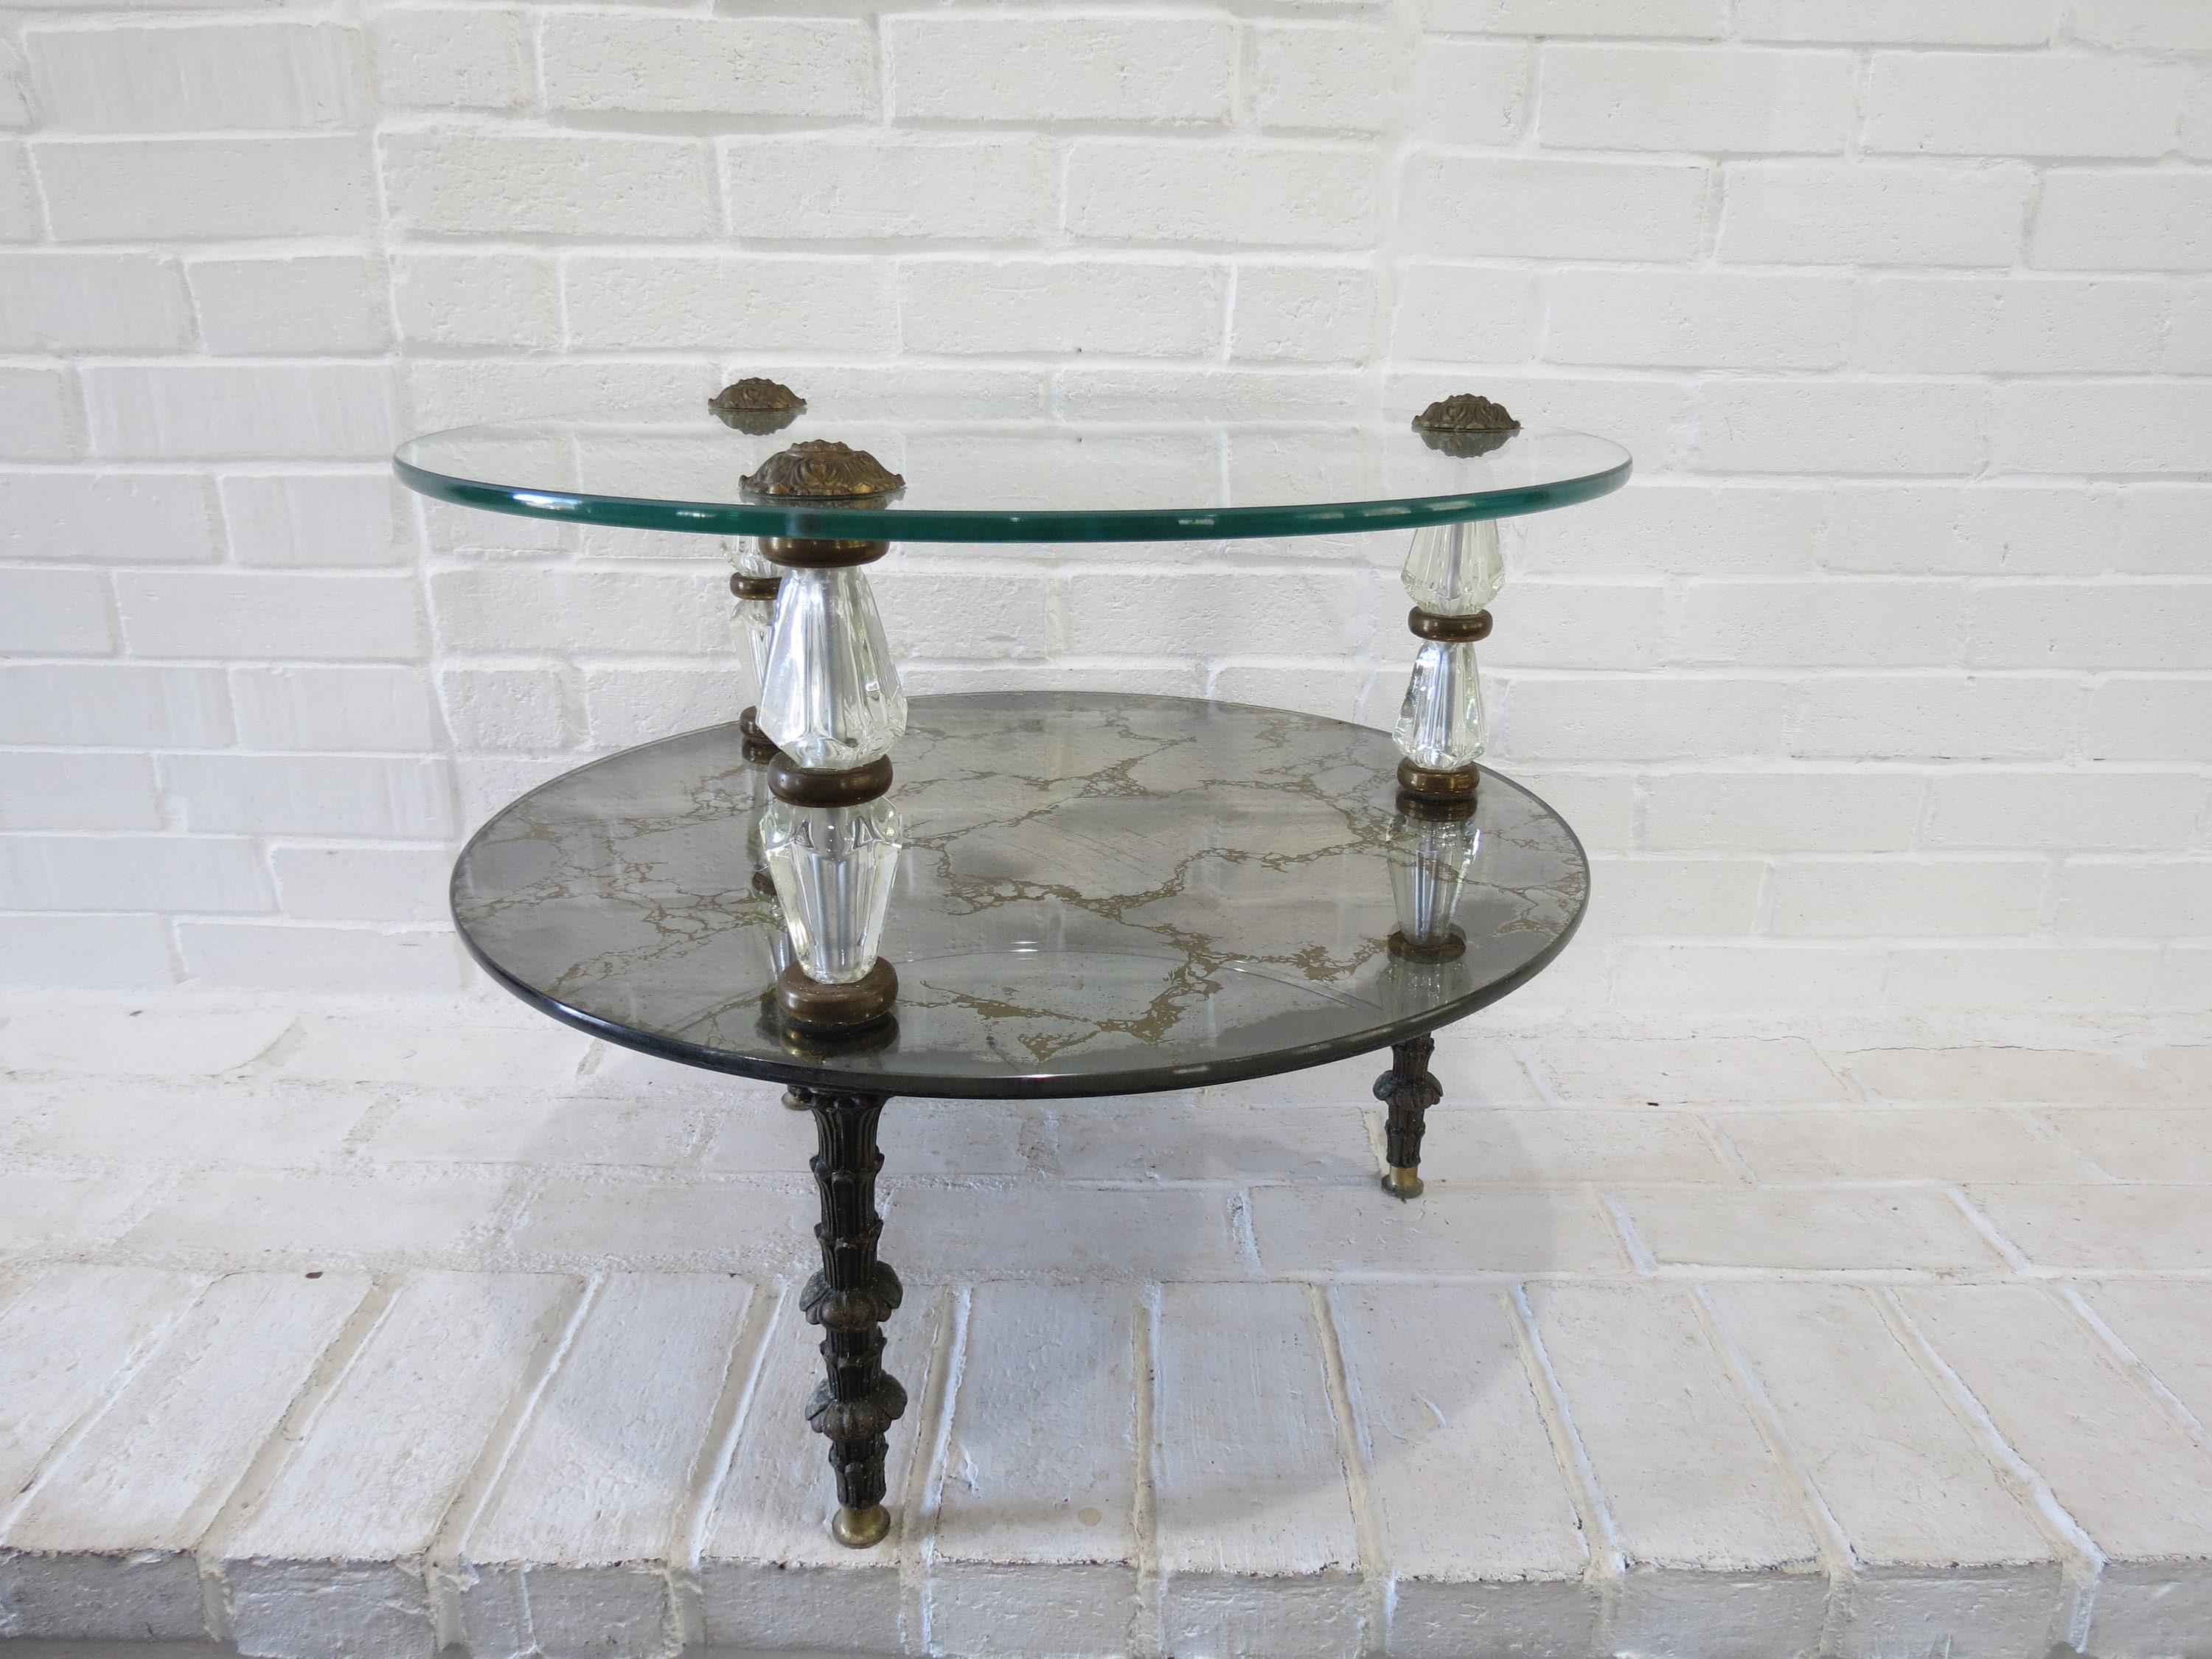 Cristal Arte - Cristal Art Glass Table with Chess Board and Musical Motif,  circa 1955